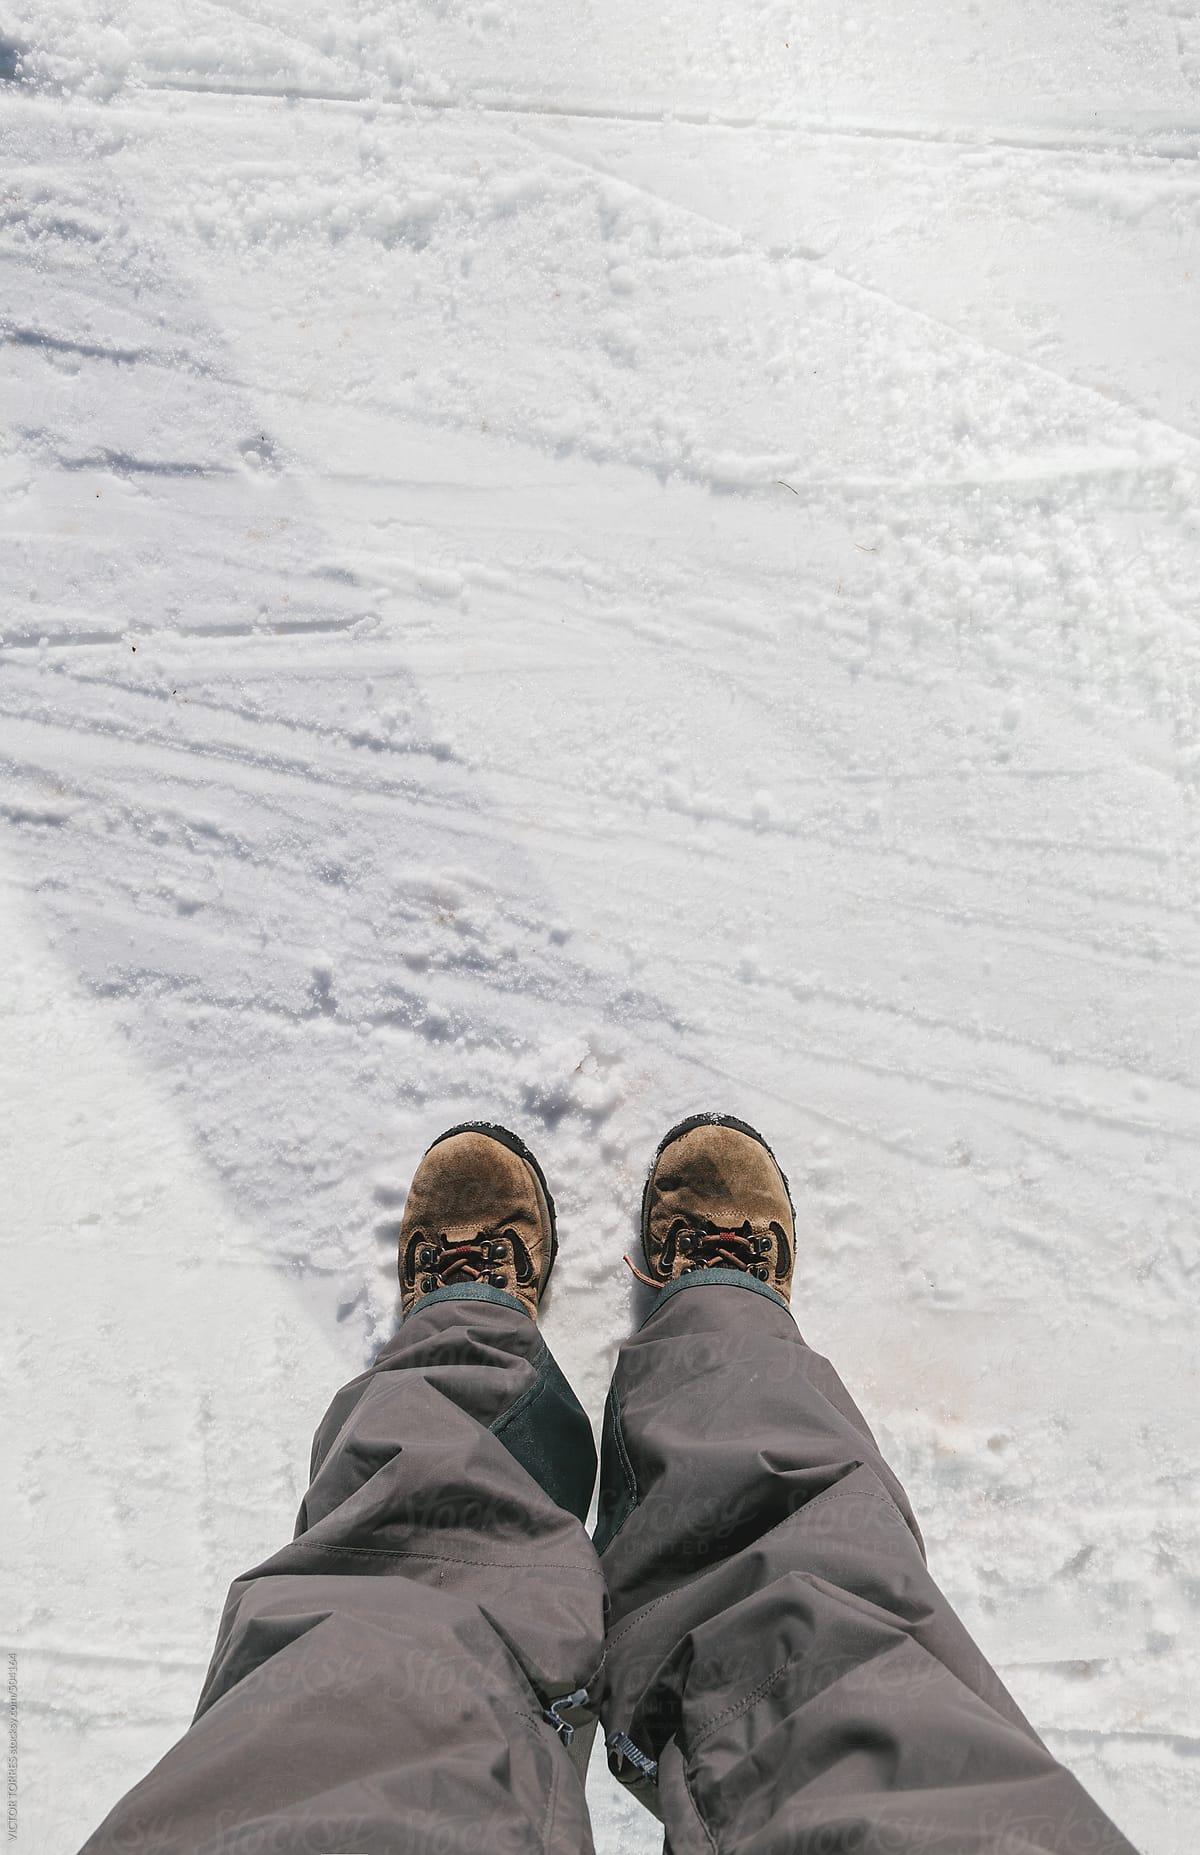 Man Standing on a Snowy Floor with Mountain Boots